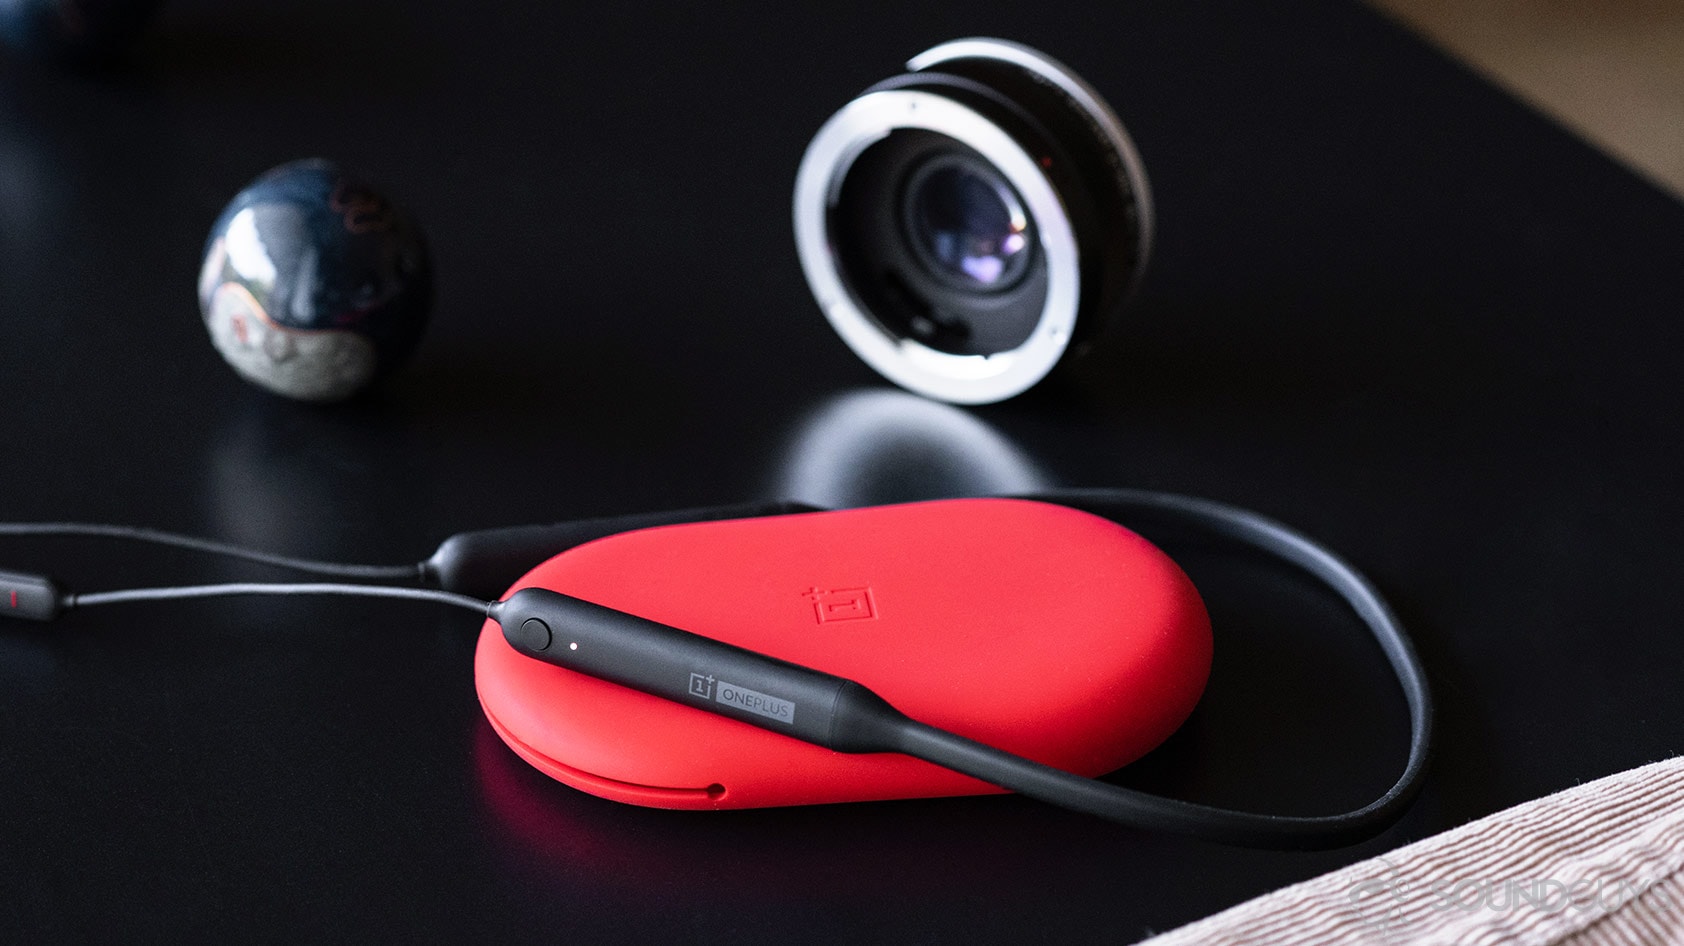 OnePlus Bullets Wireless 2: The shortcut button and lit LED.